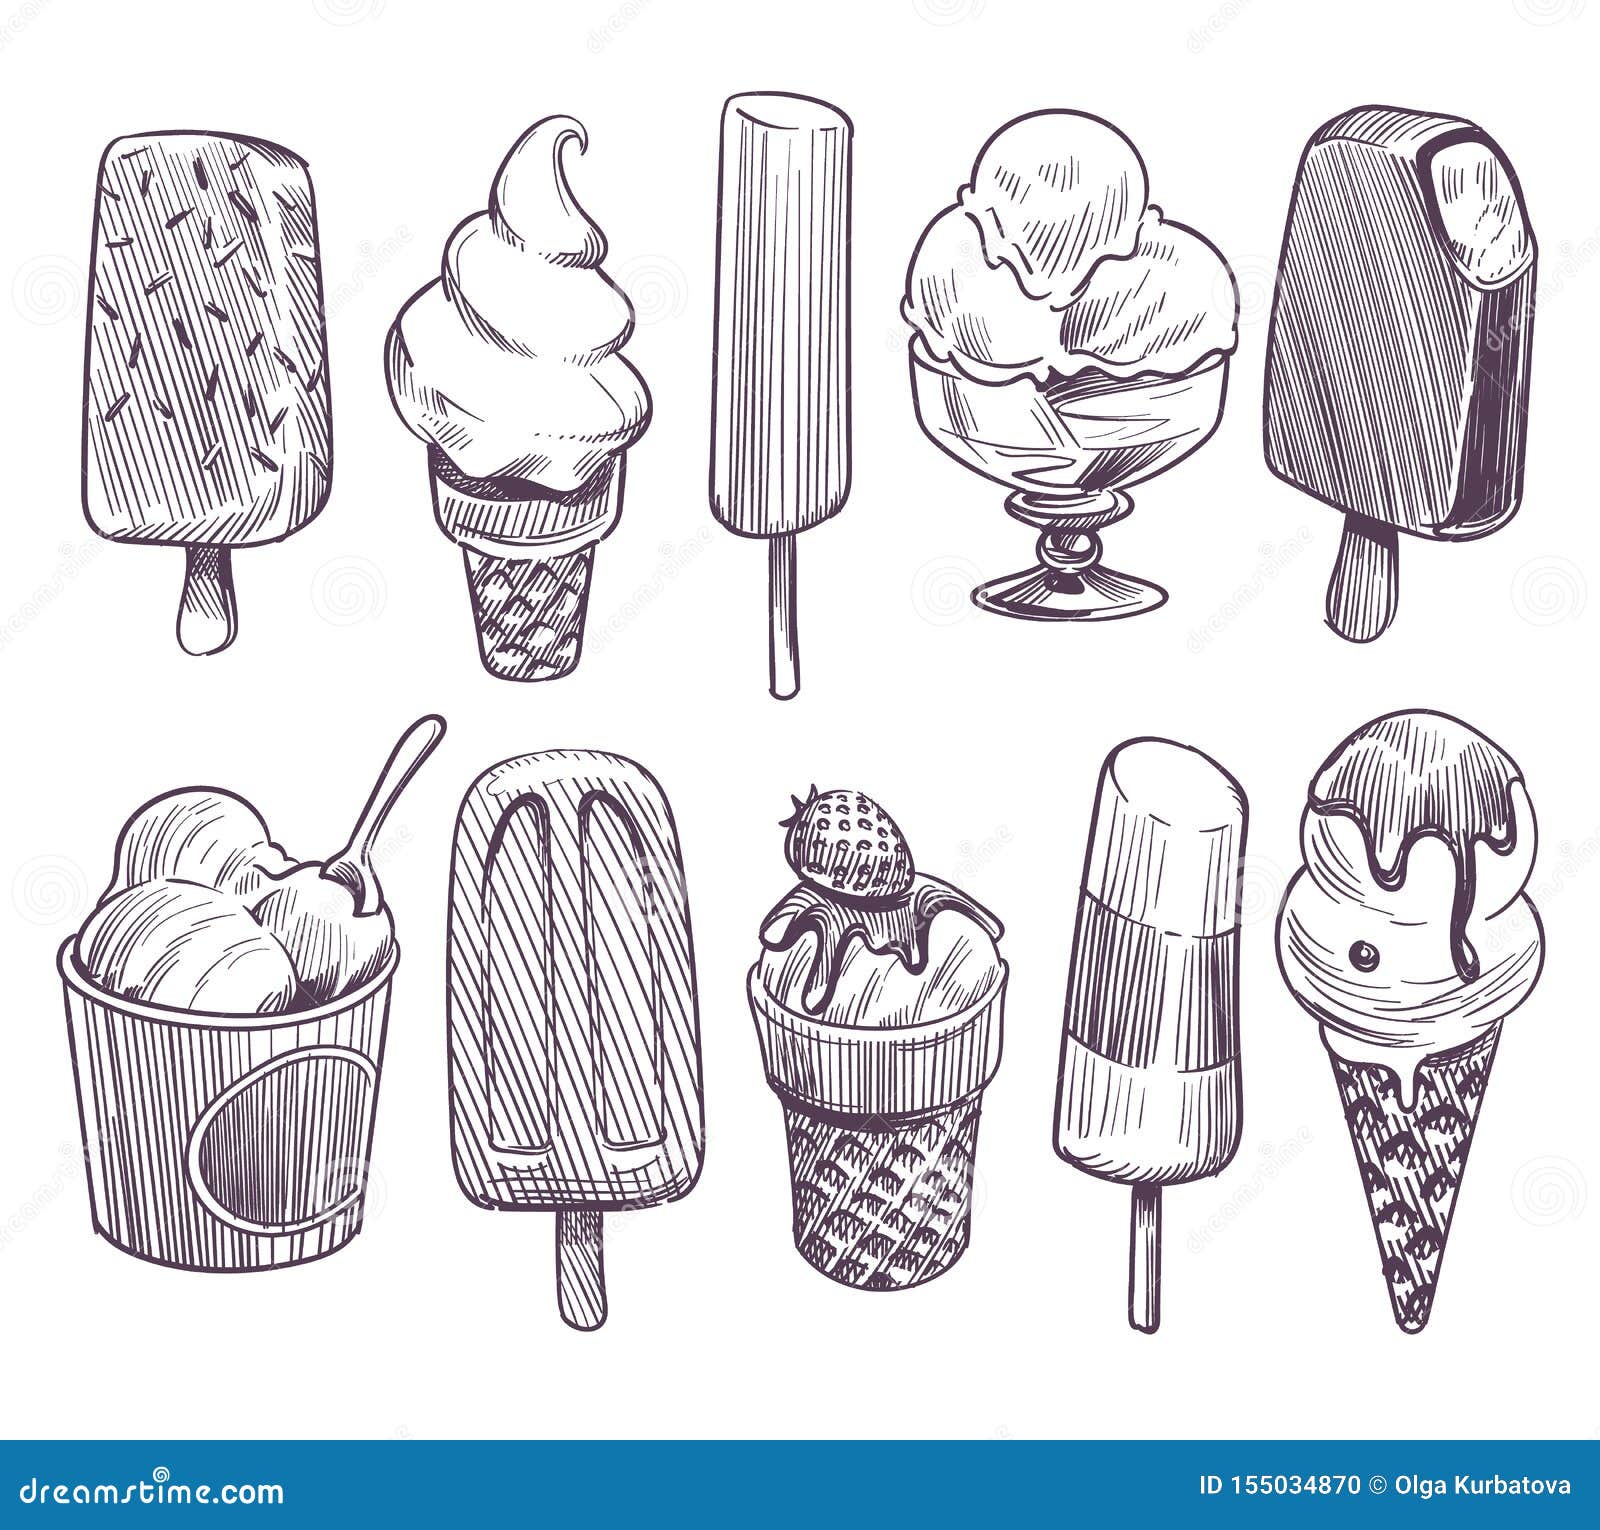 sketch ice cream. different bowls with ice cream, eskimo with chocolate glaze. wafer cone sundae whipped fruit cream